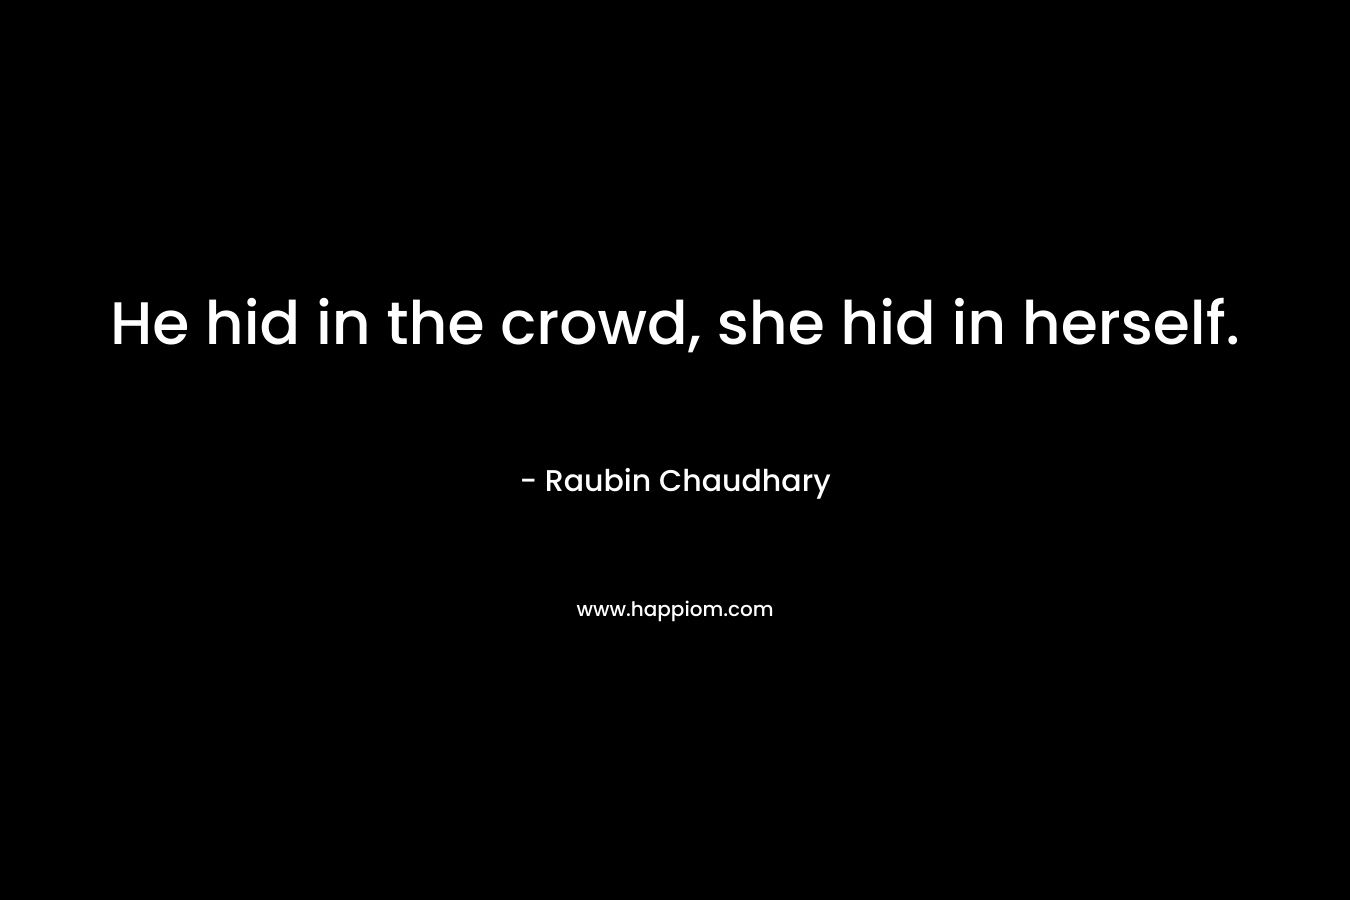 He hid in the crowd, she hid in herself.